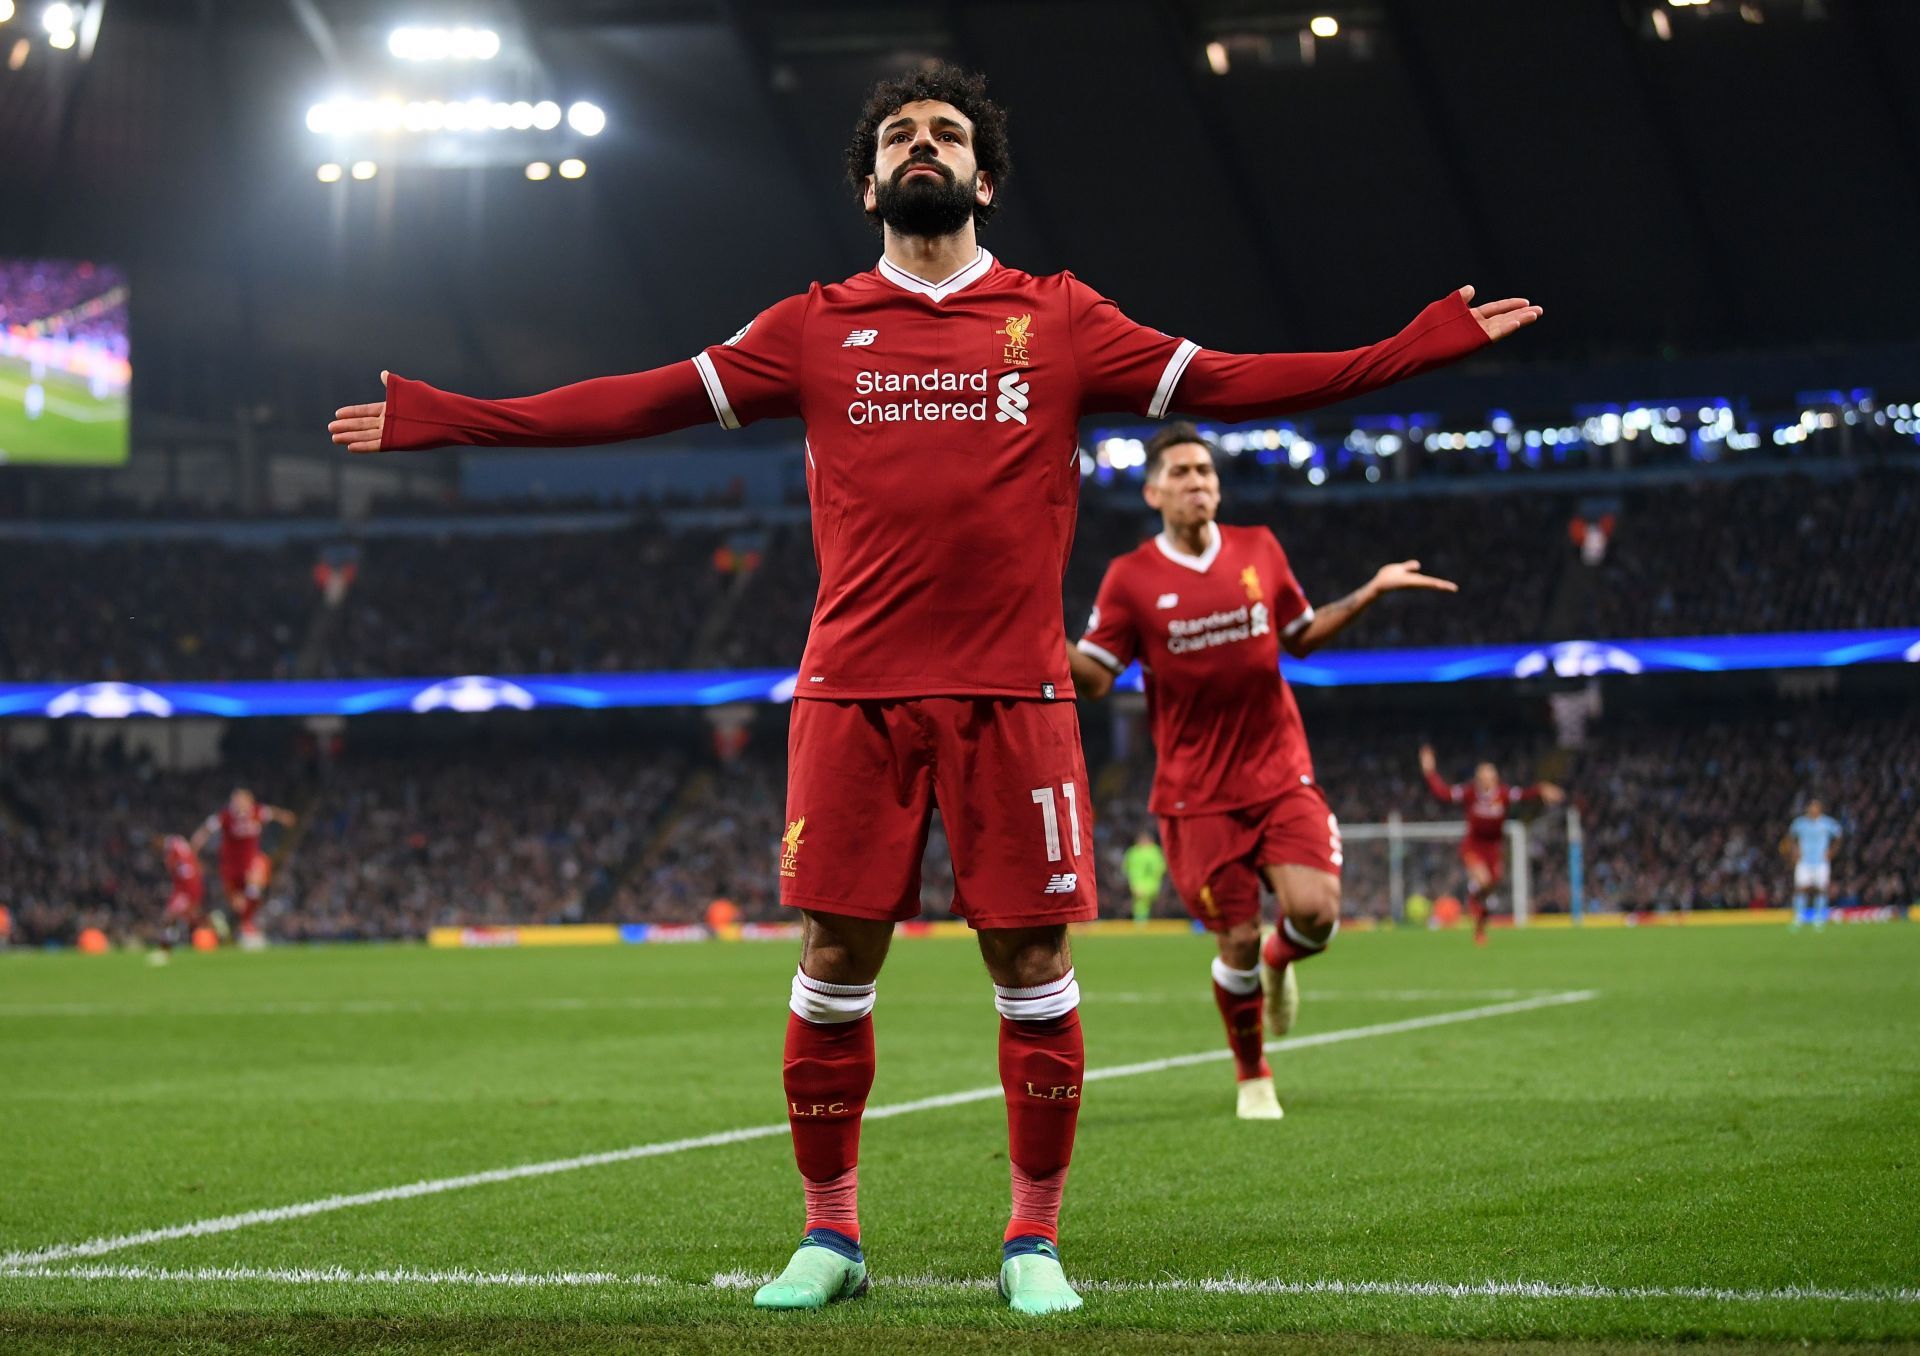 Mo Salah has been in scintillating form for the Reds this season